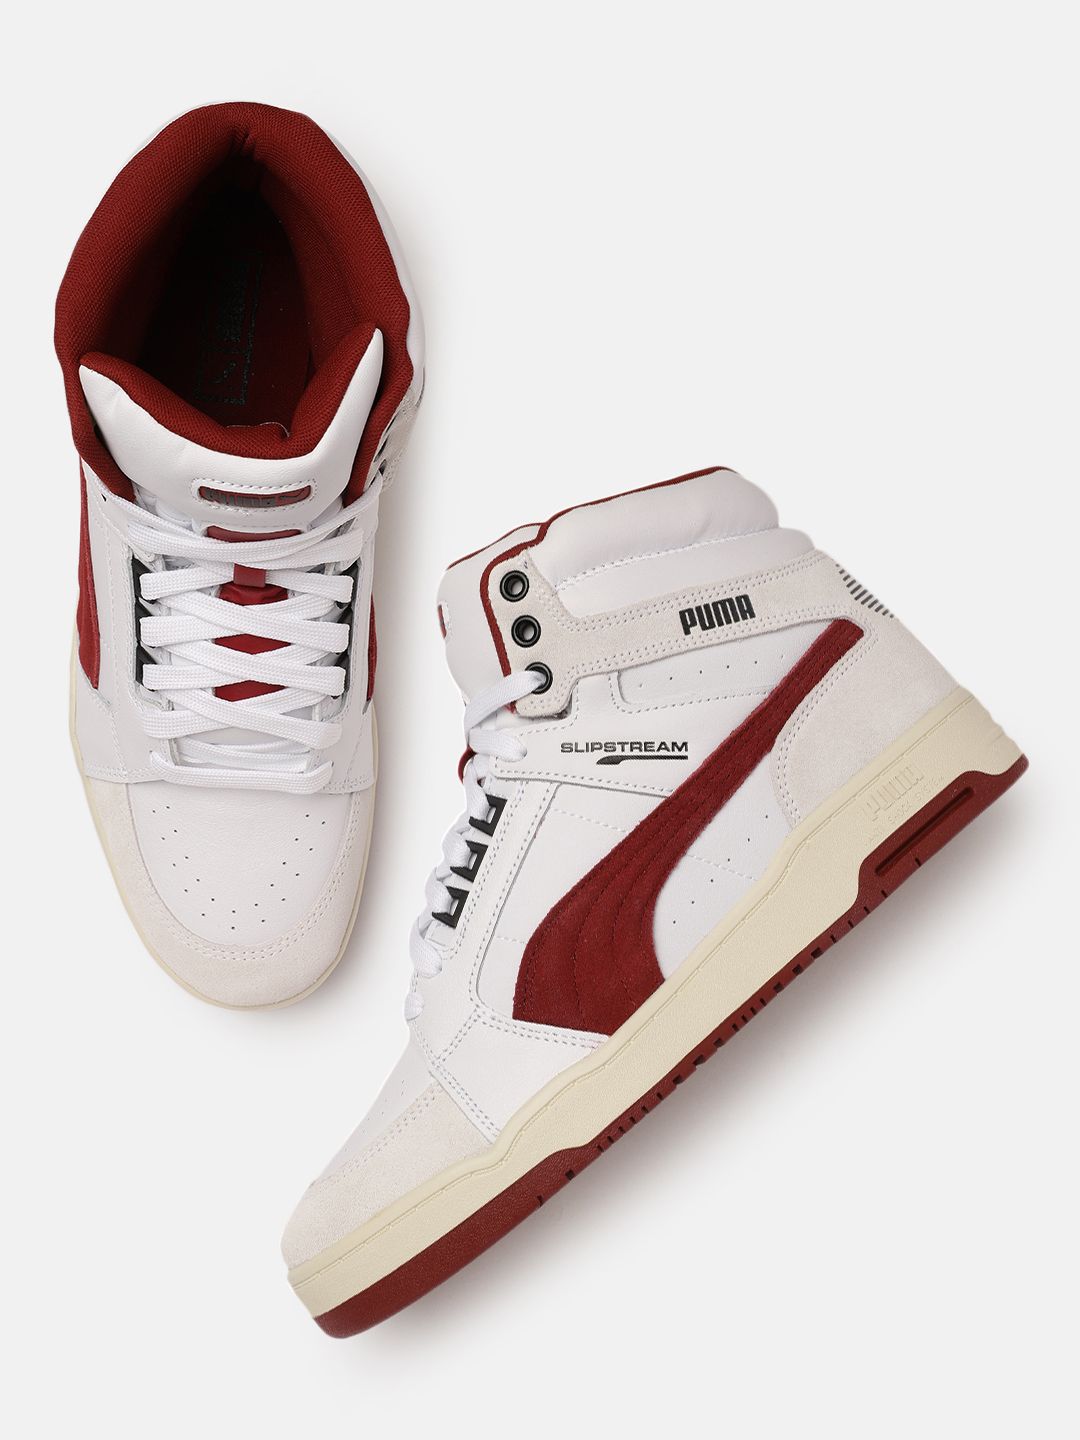 Puma Unisex Off White Slipstream Mid Heritage Leather Sneakers Price in India